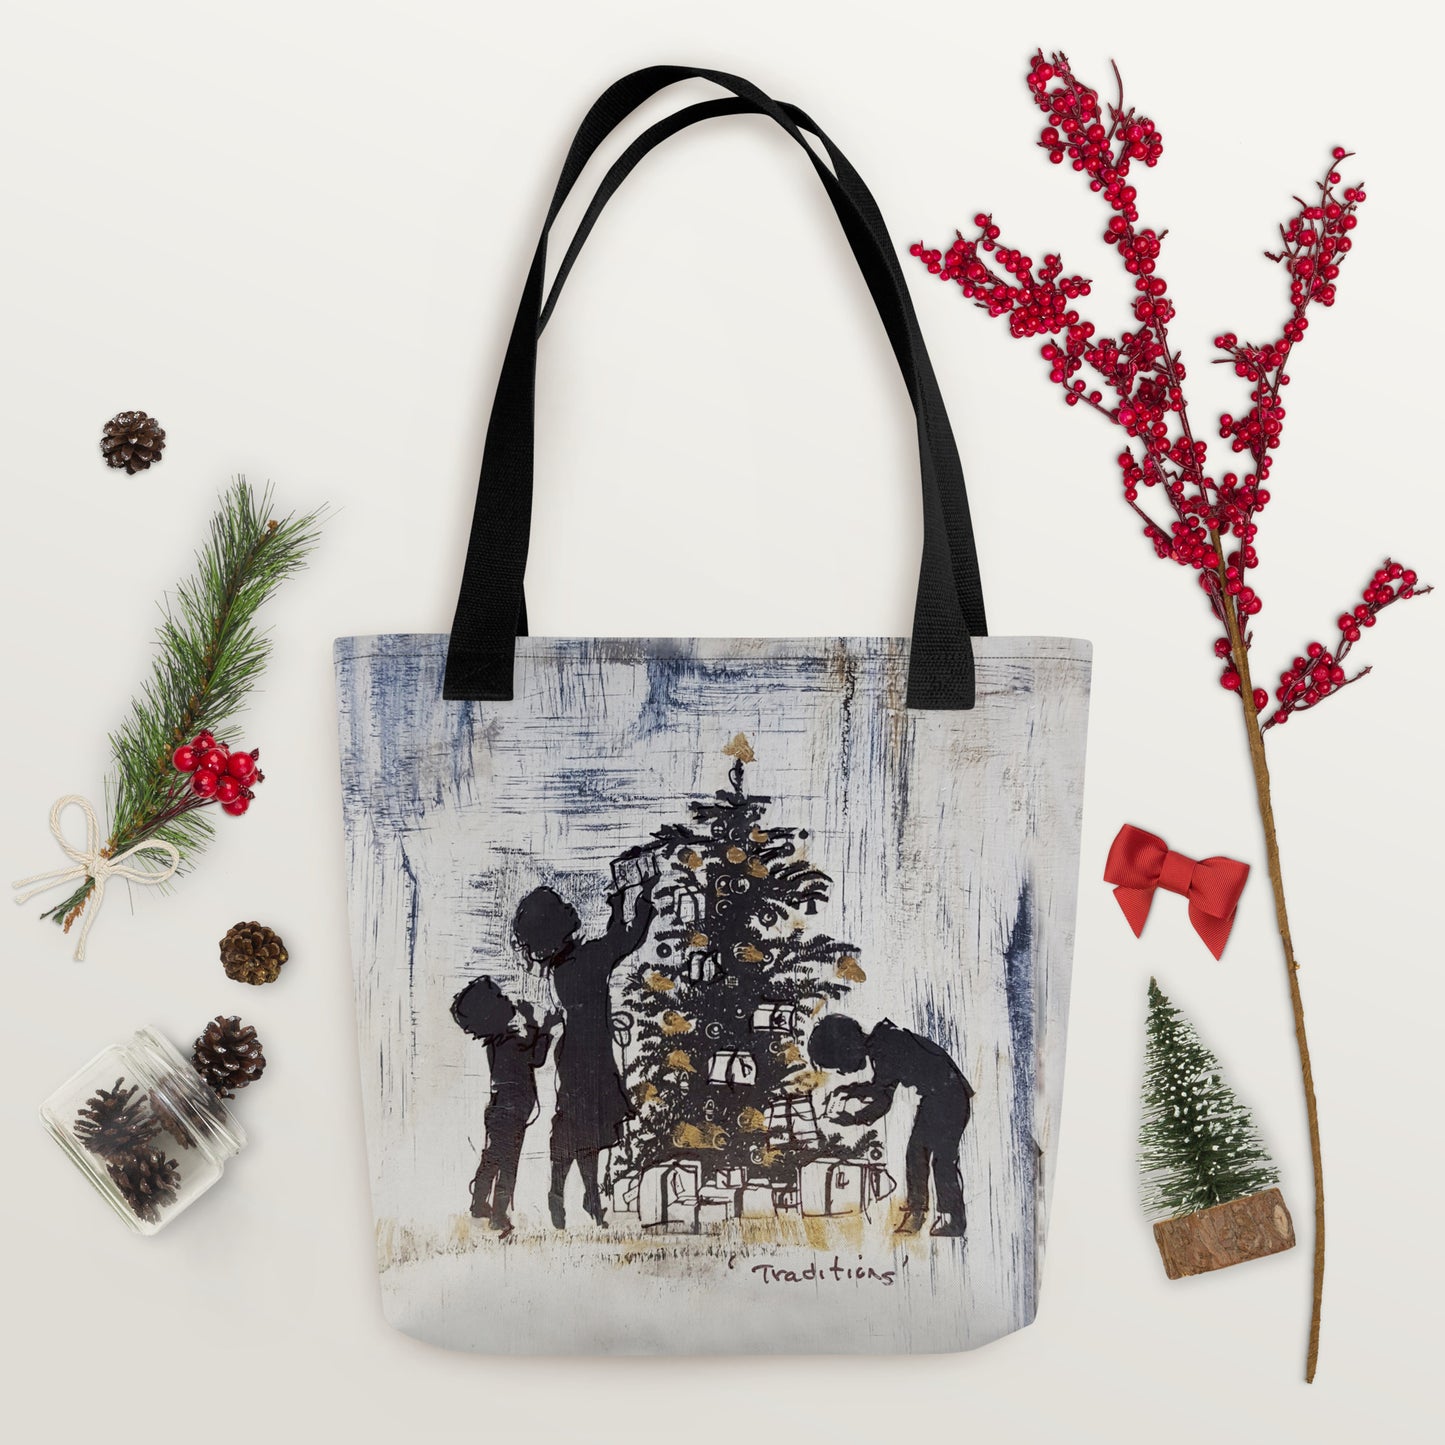 Traditions - Artful Tote Bag